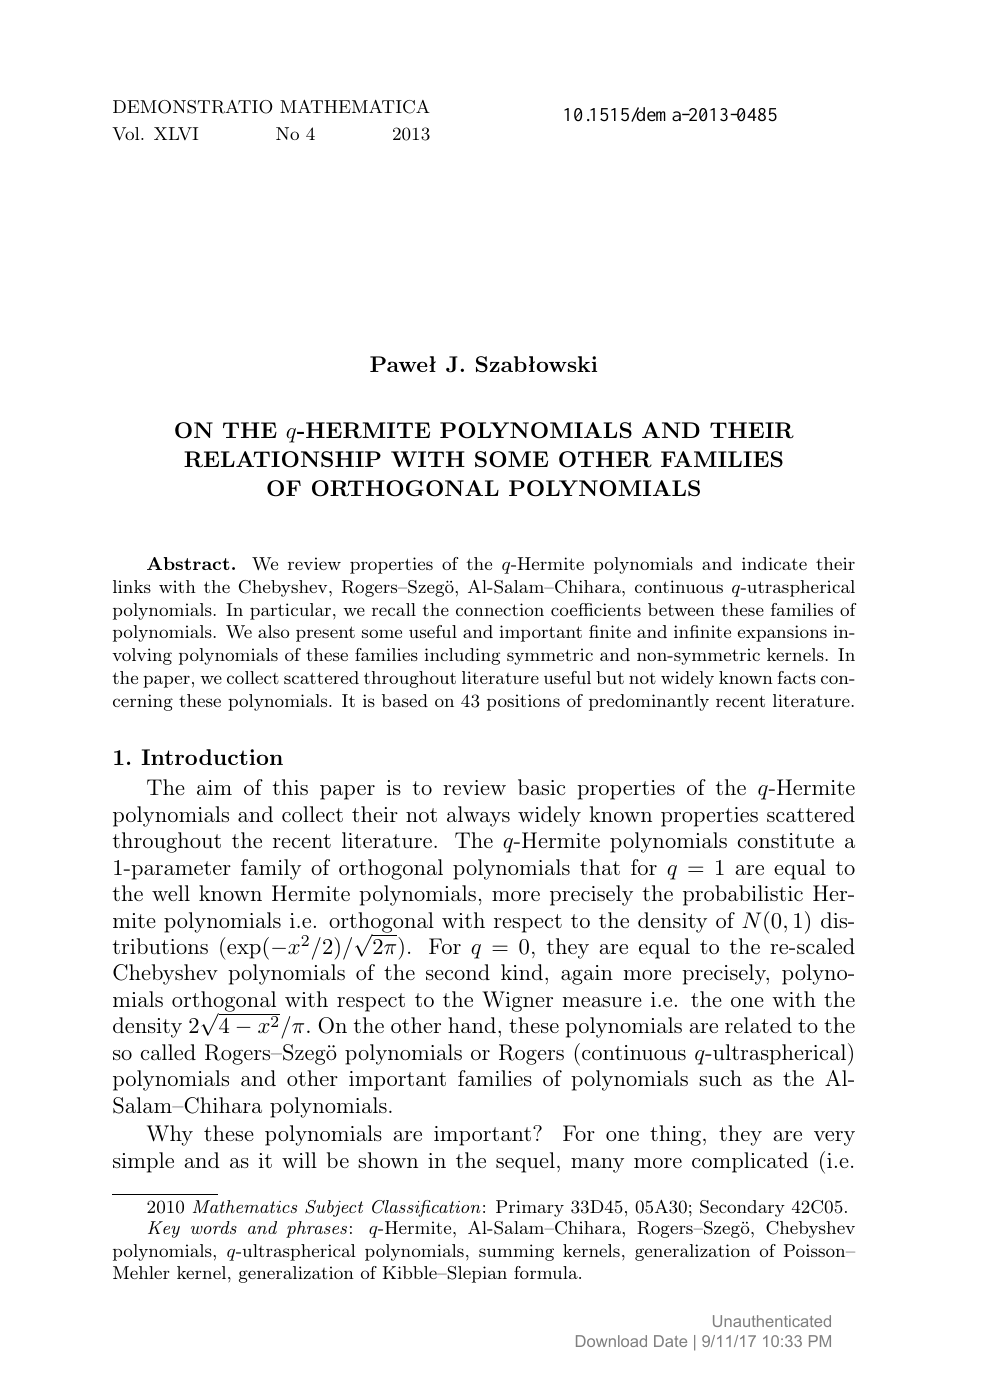 On The Q Hermite Polynomials And Their Relationship With Some Other Families Of Orthogonal Polynomials Topic Of Research Paper In Mathematics Download Scholarly Article Pdf And Read For Free On Cyberleninka Open